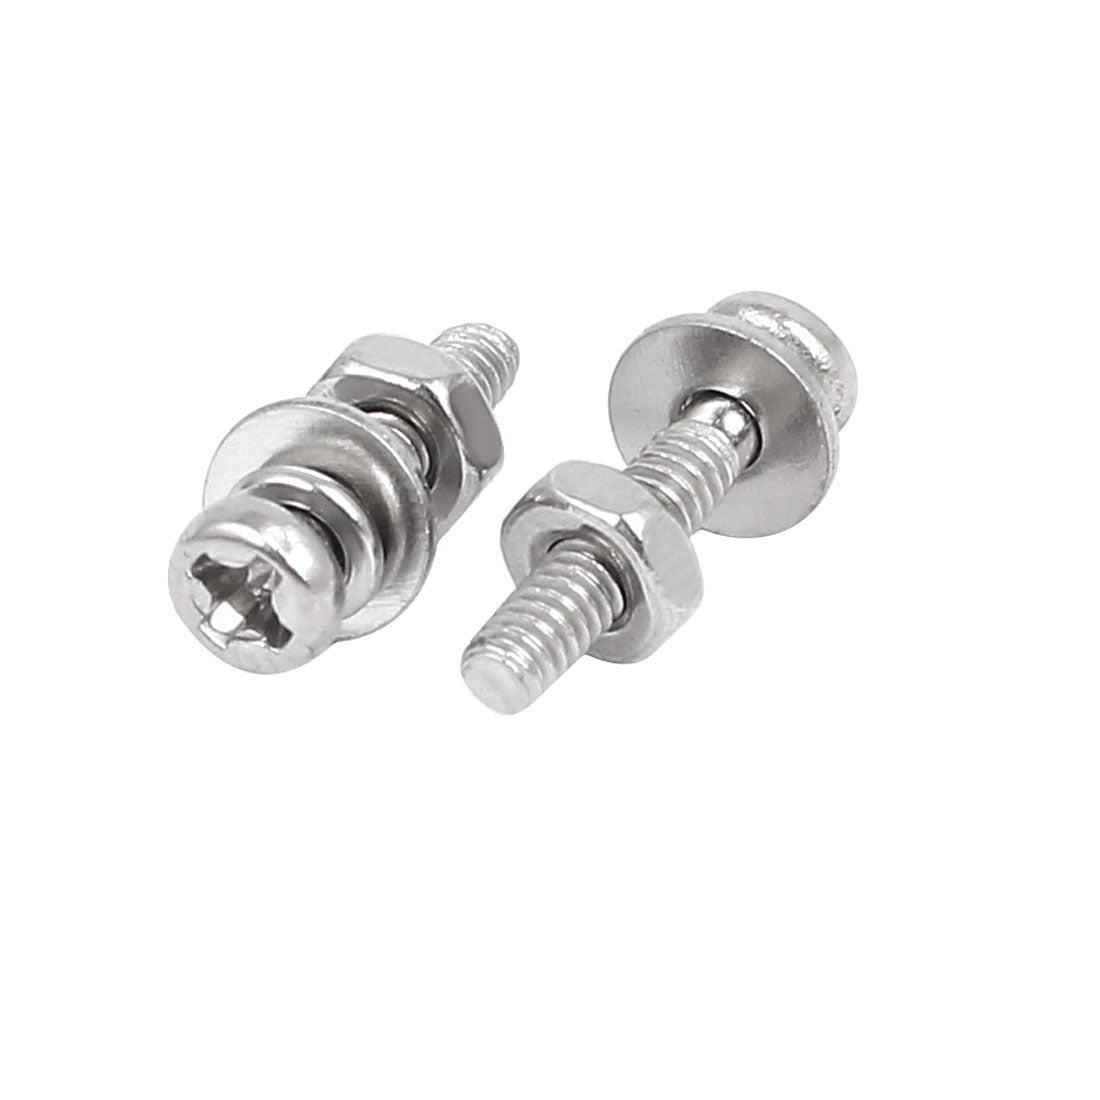 uxcell Uxcell M2 x 10mm 304 Stainless Steel Phillips Pan Head Screws Nuts w Washers 30 Sets